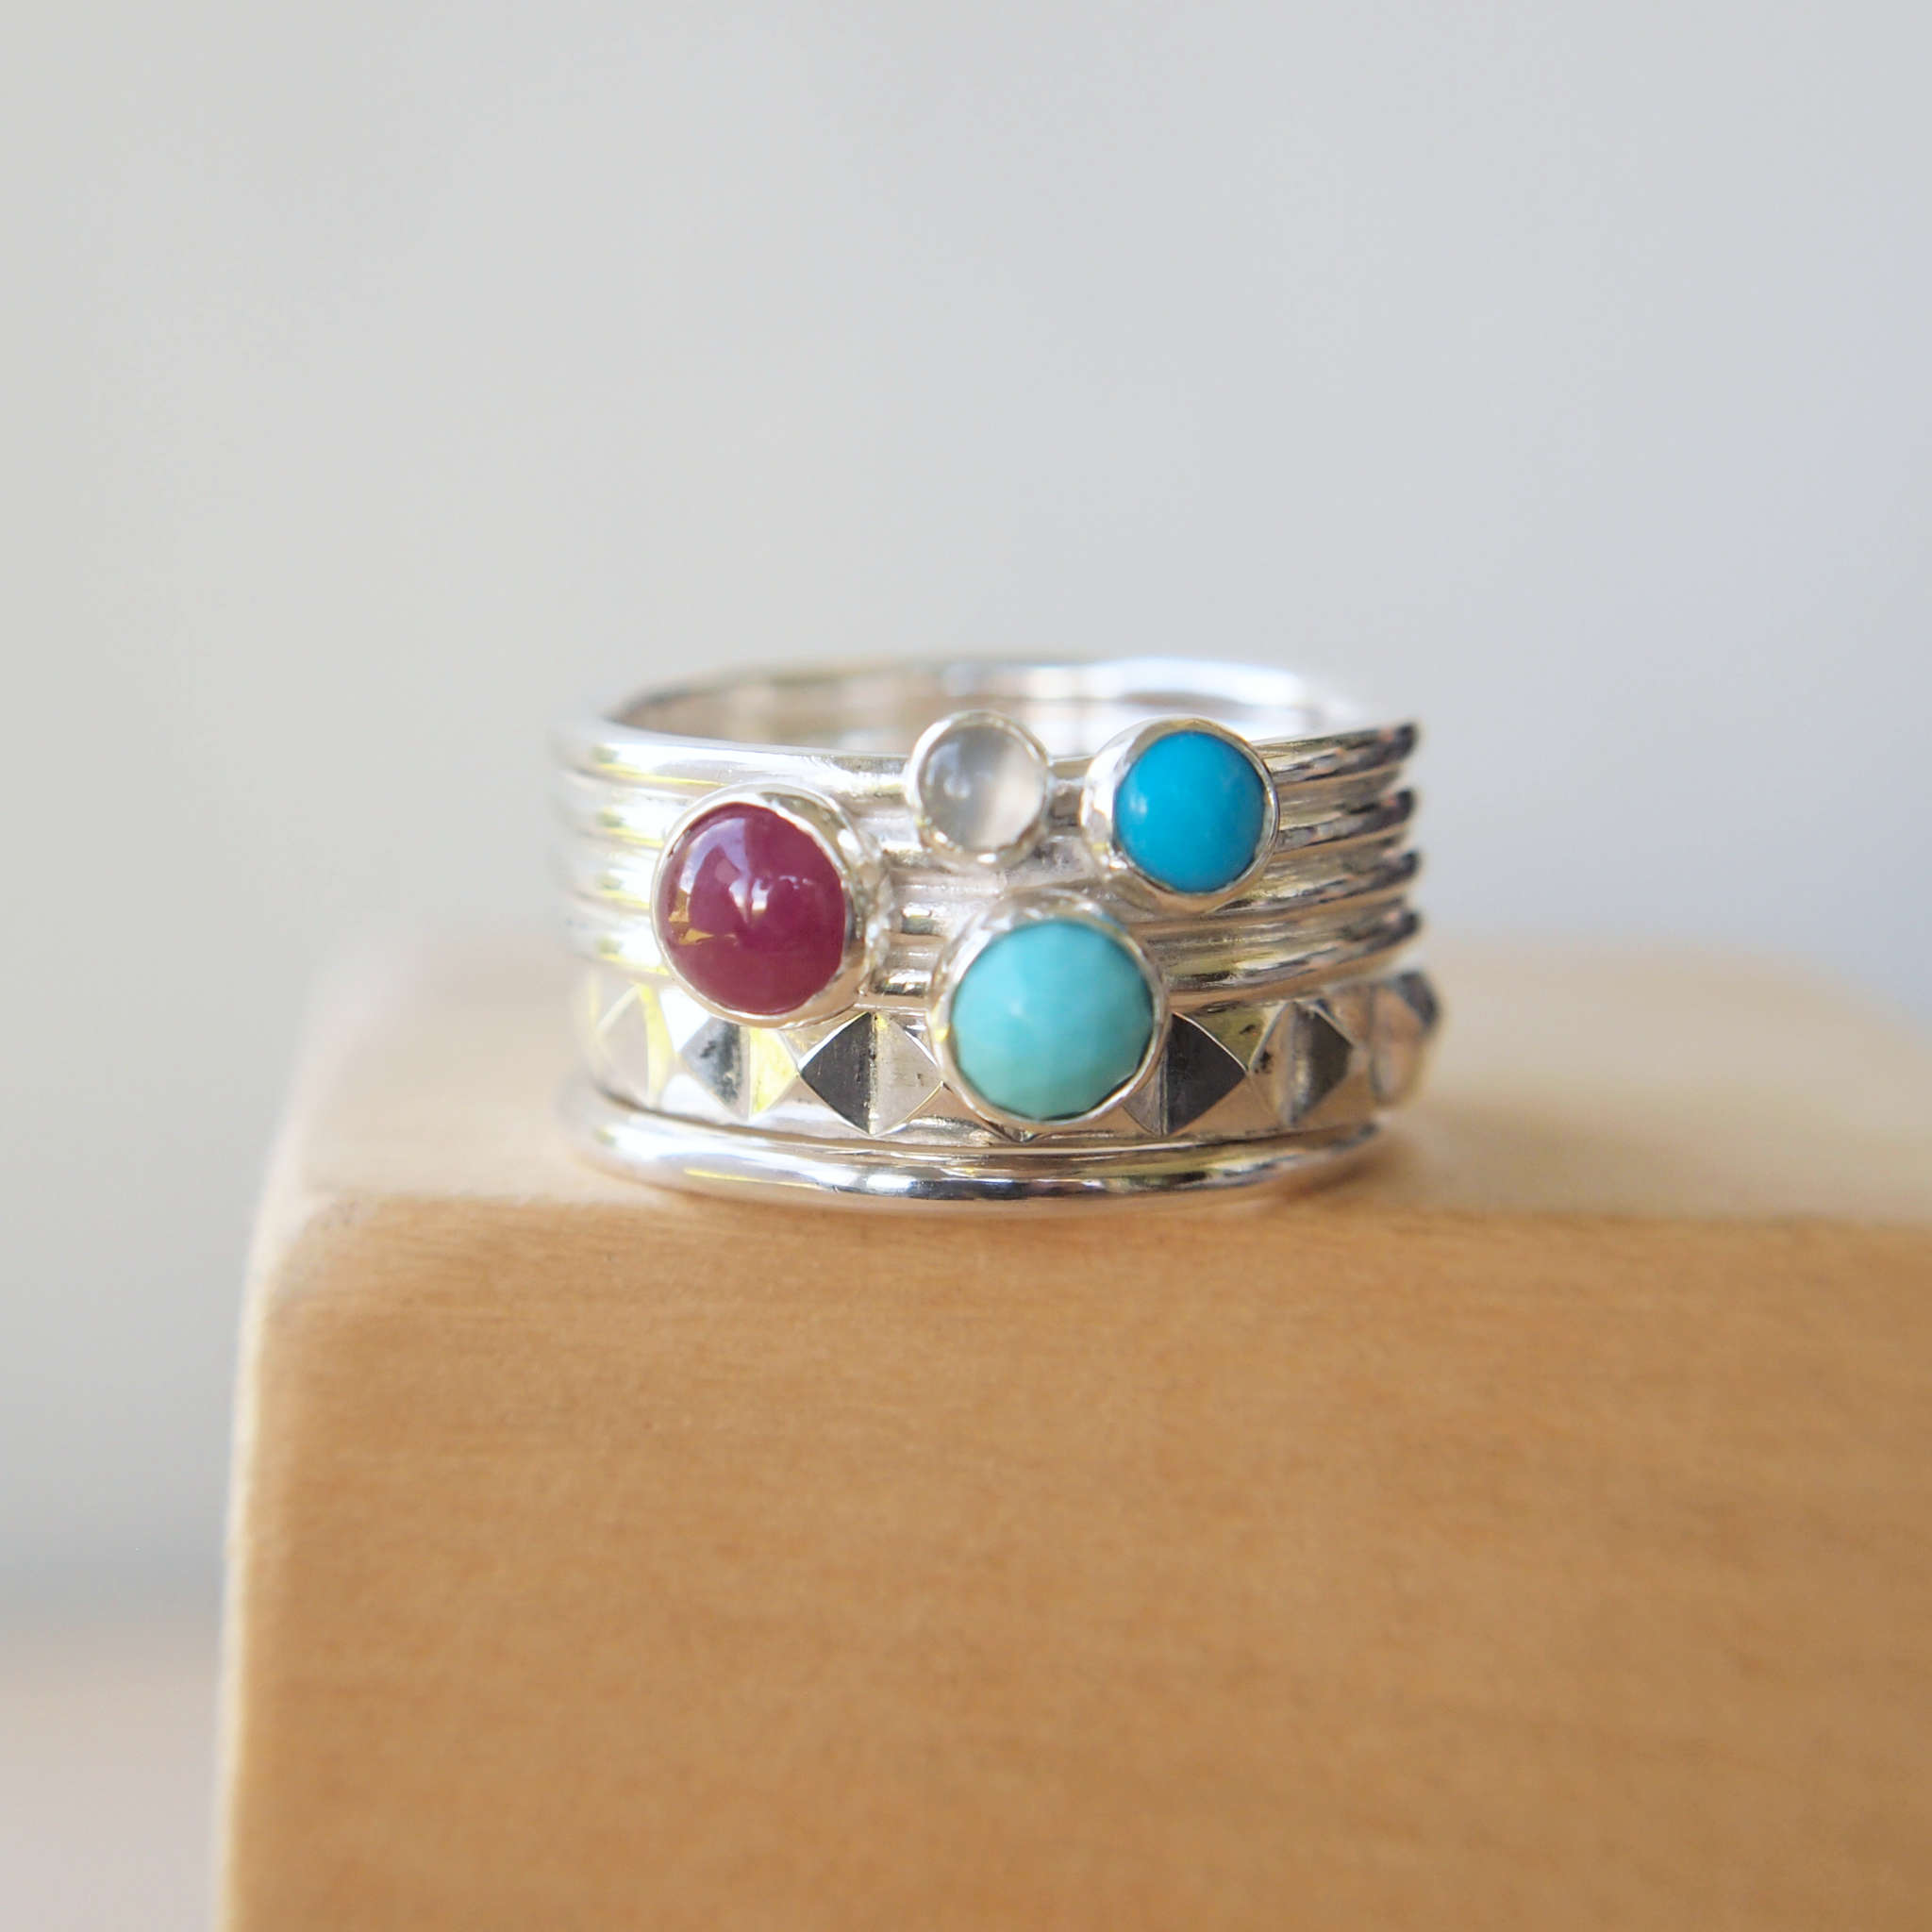 Custom made silver ring with turquoise and ruby in a stacking ring style. Handmade in Scotland by maram jewellery